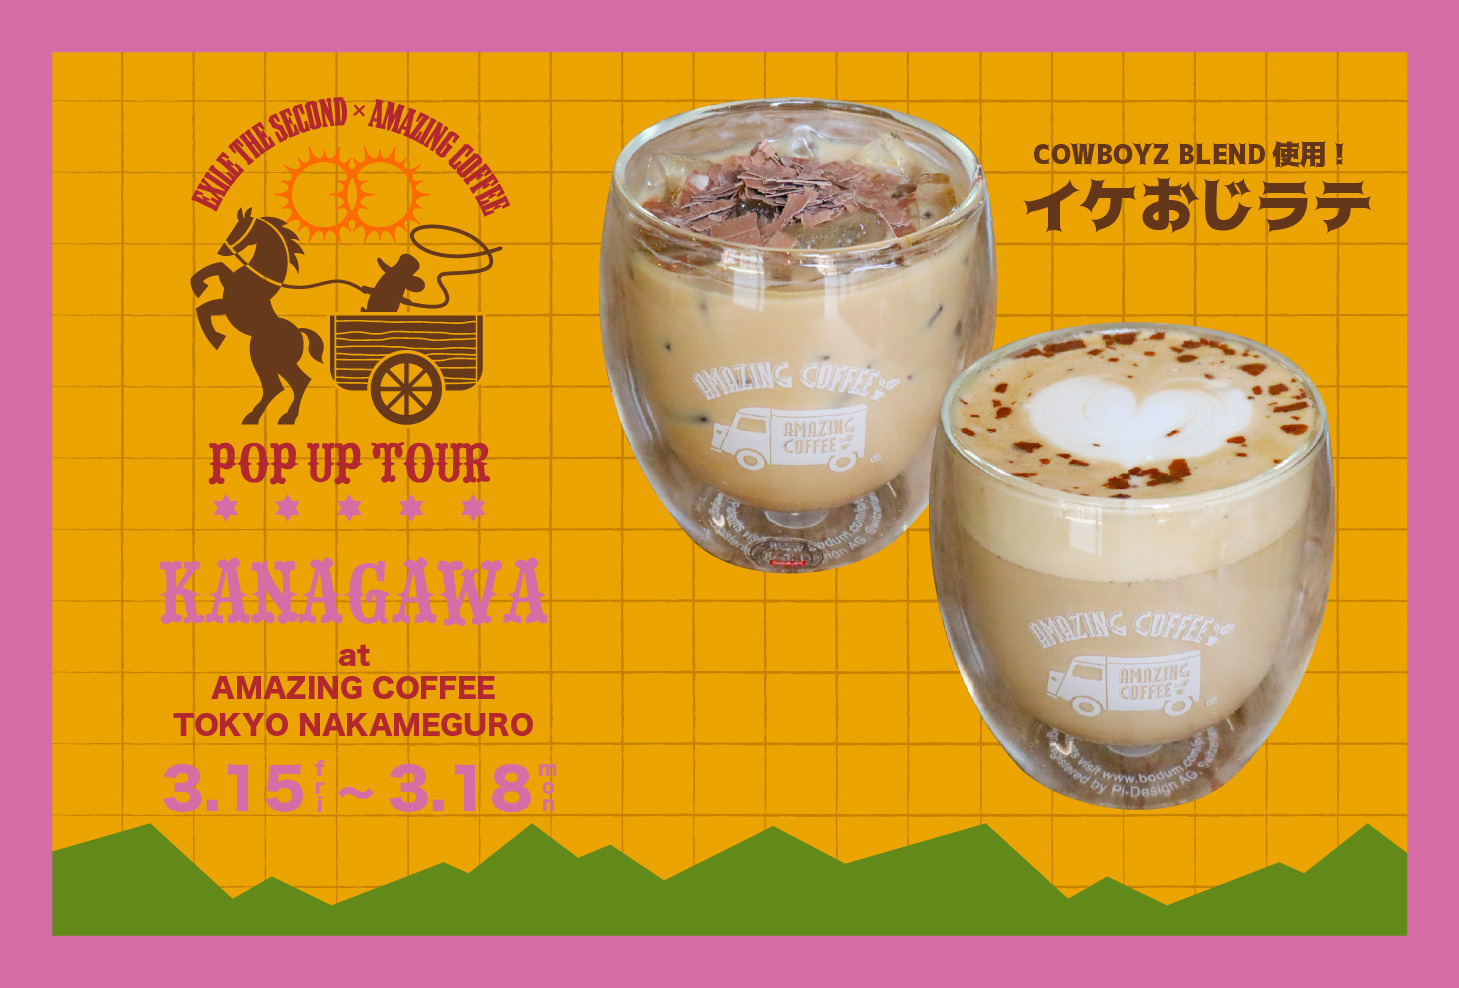 『EXILE THE SECOND × AMAZING COFFEE POP UP TOUR』in 神奈川 3月15日(金)〜3月18日(月) AMAZING COFFEE TOKYO NAKAMEGUROにて開催！